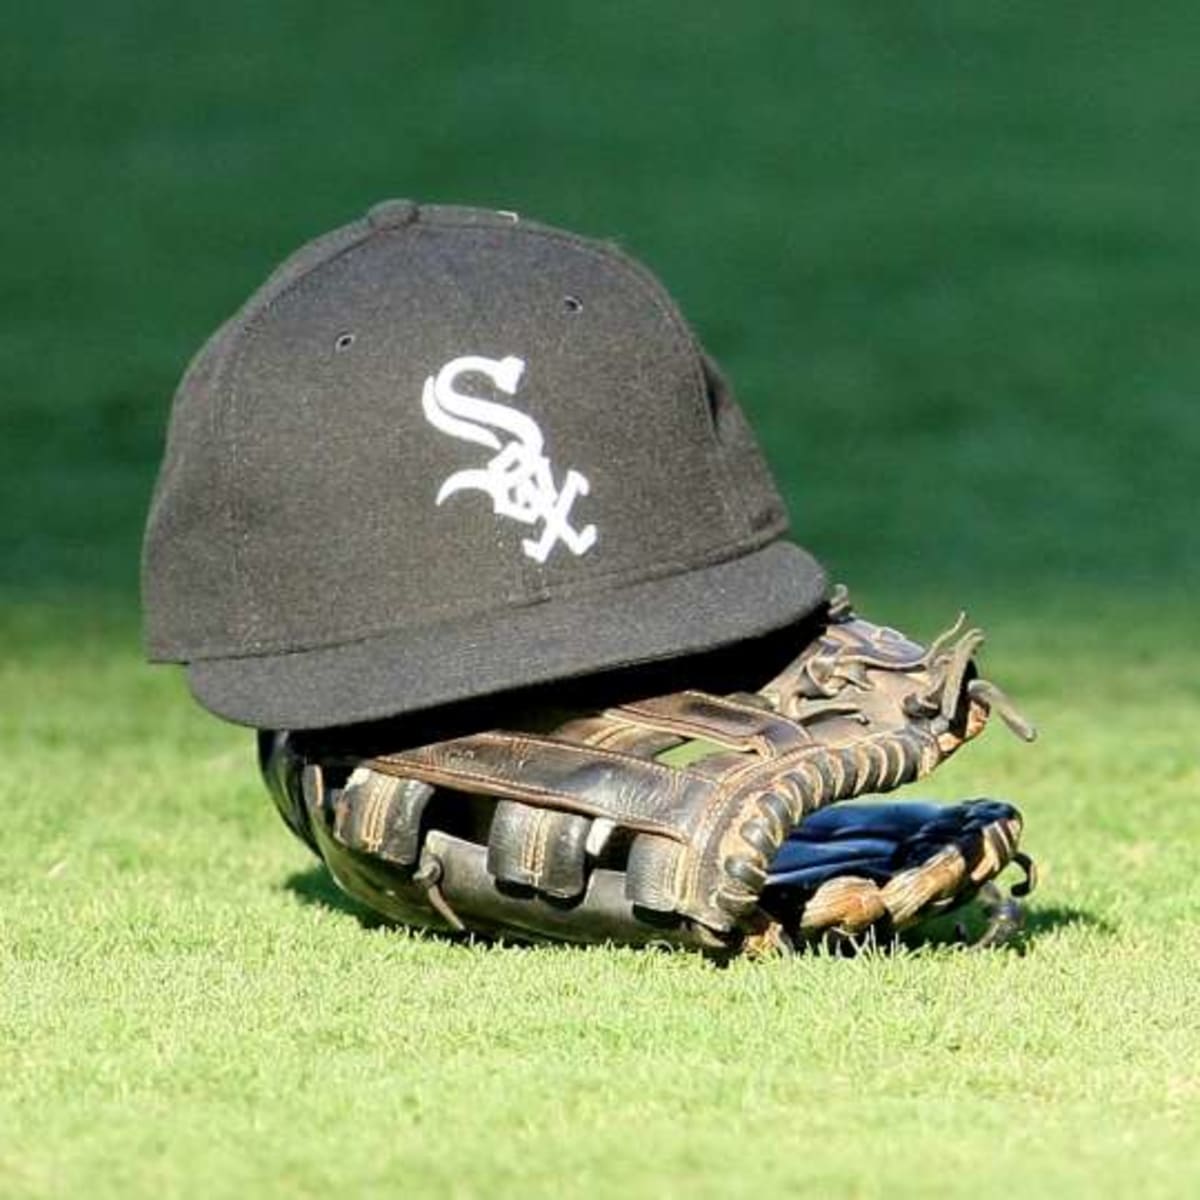 Straight Outta Compton': White Sox Hat Mistake Noticed – The